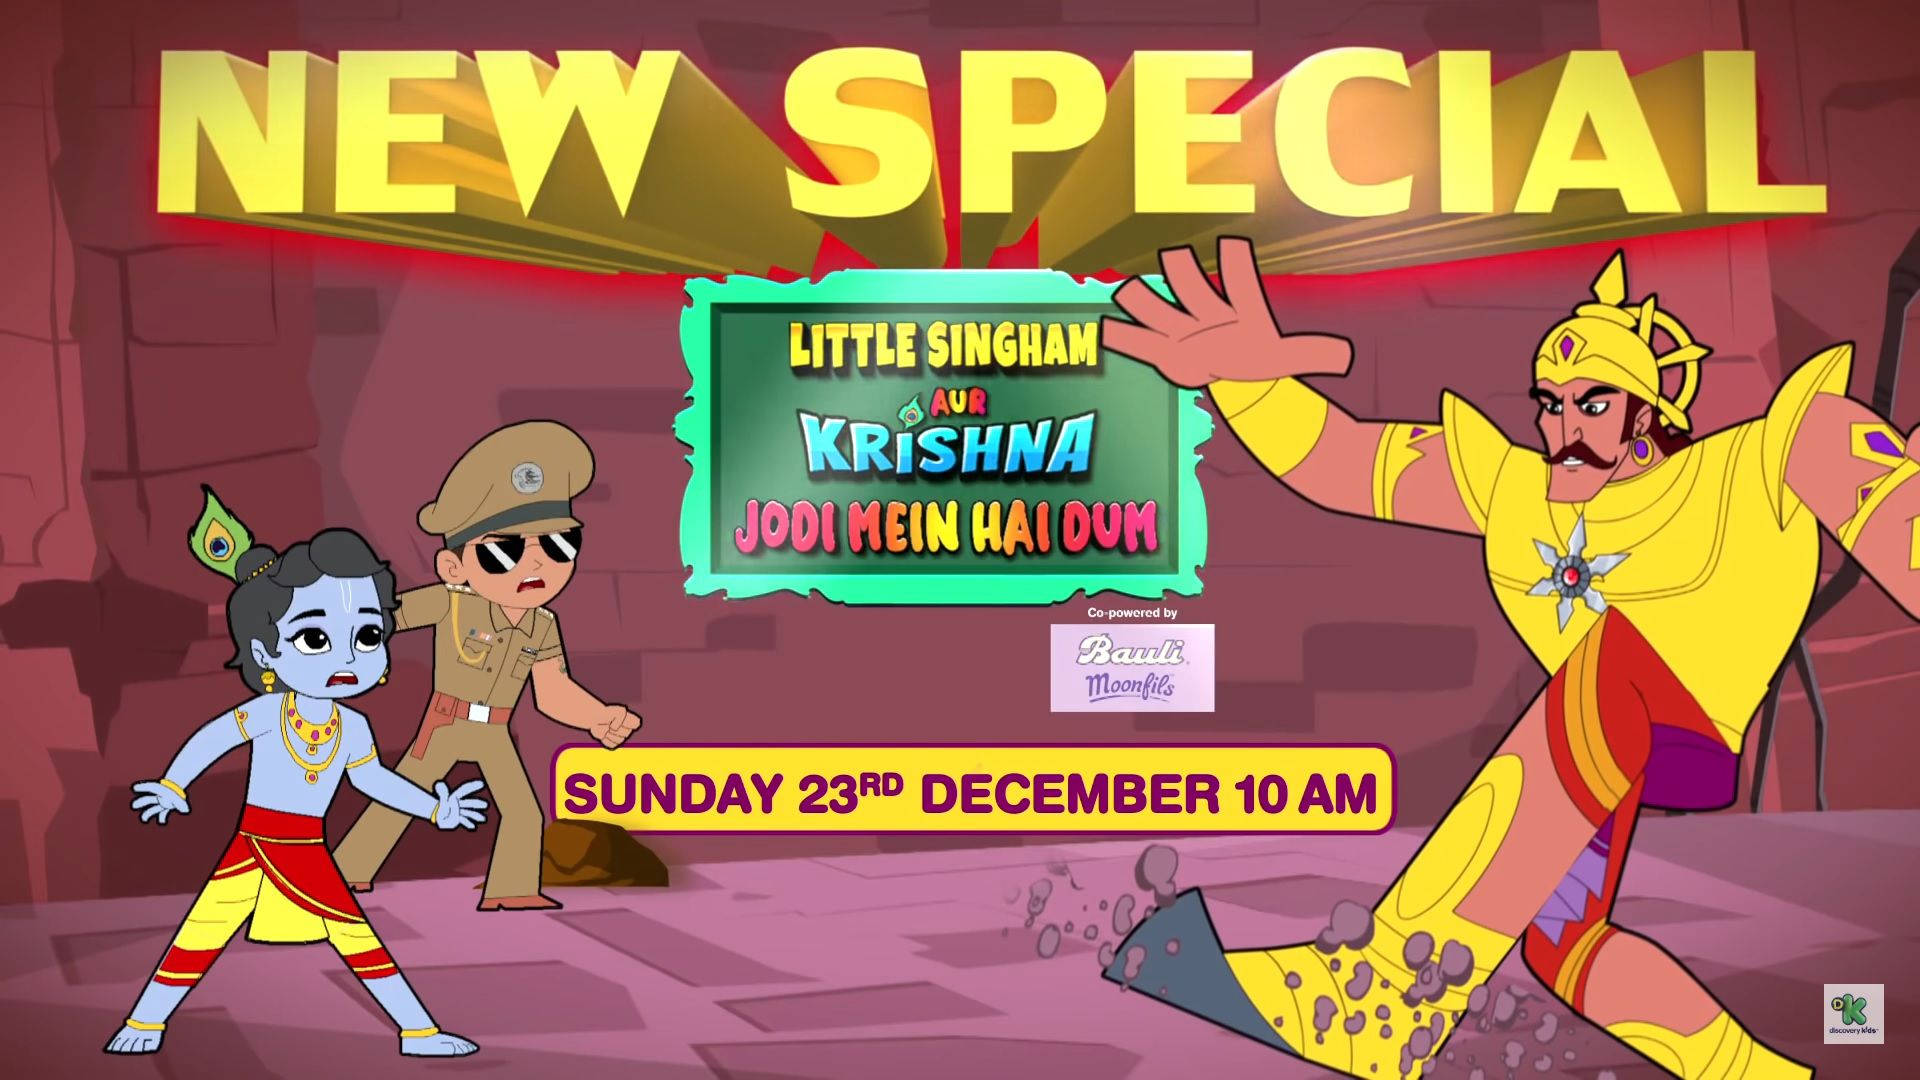 Little Singham With Egyptian Warrior Background